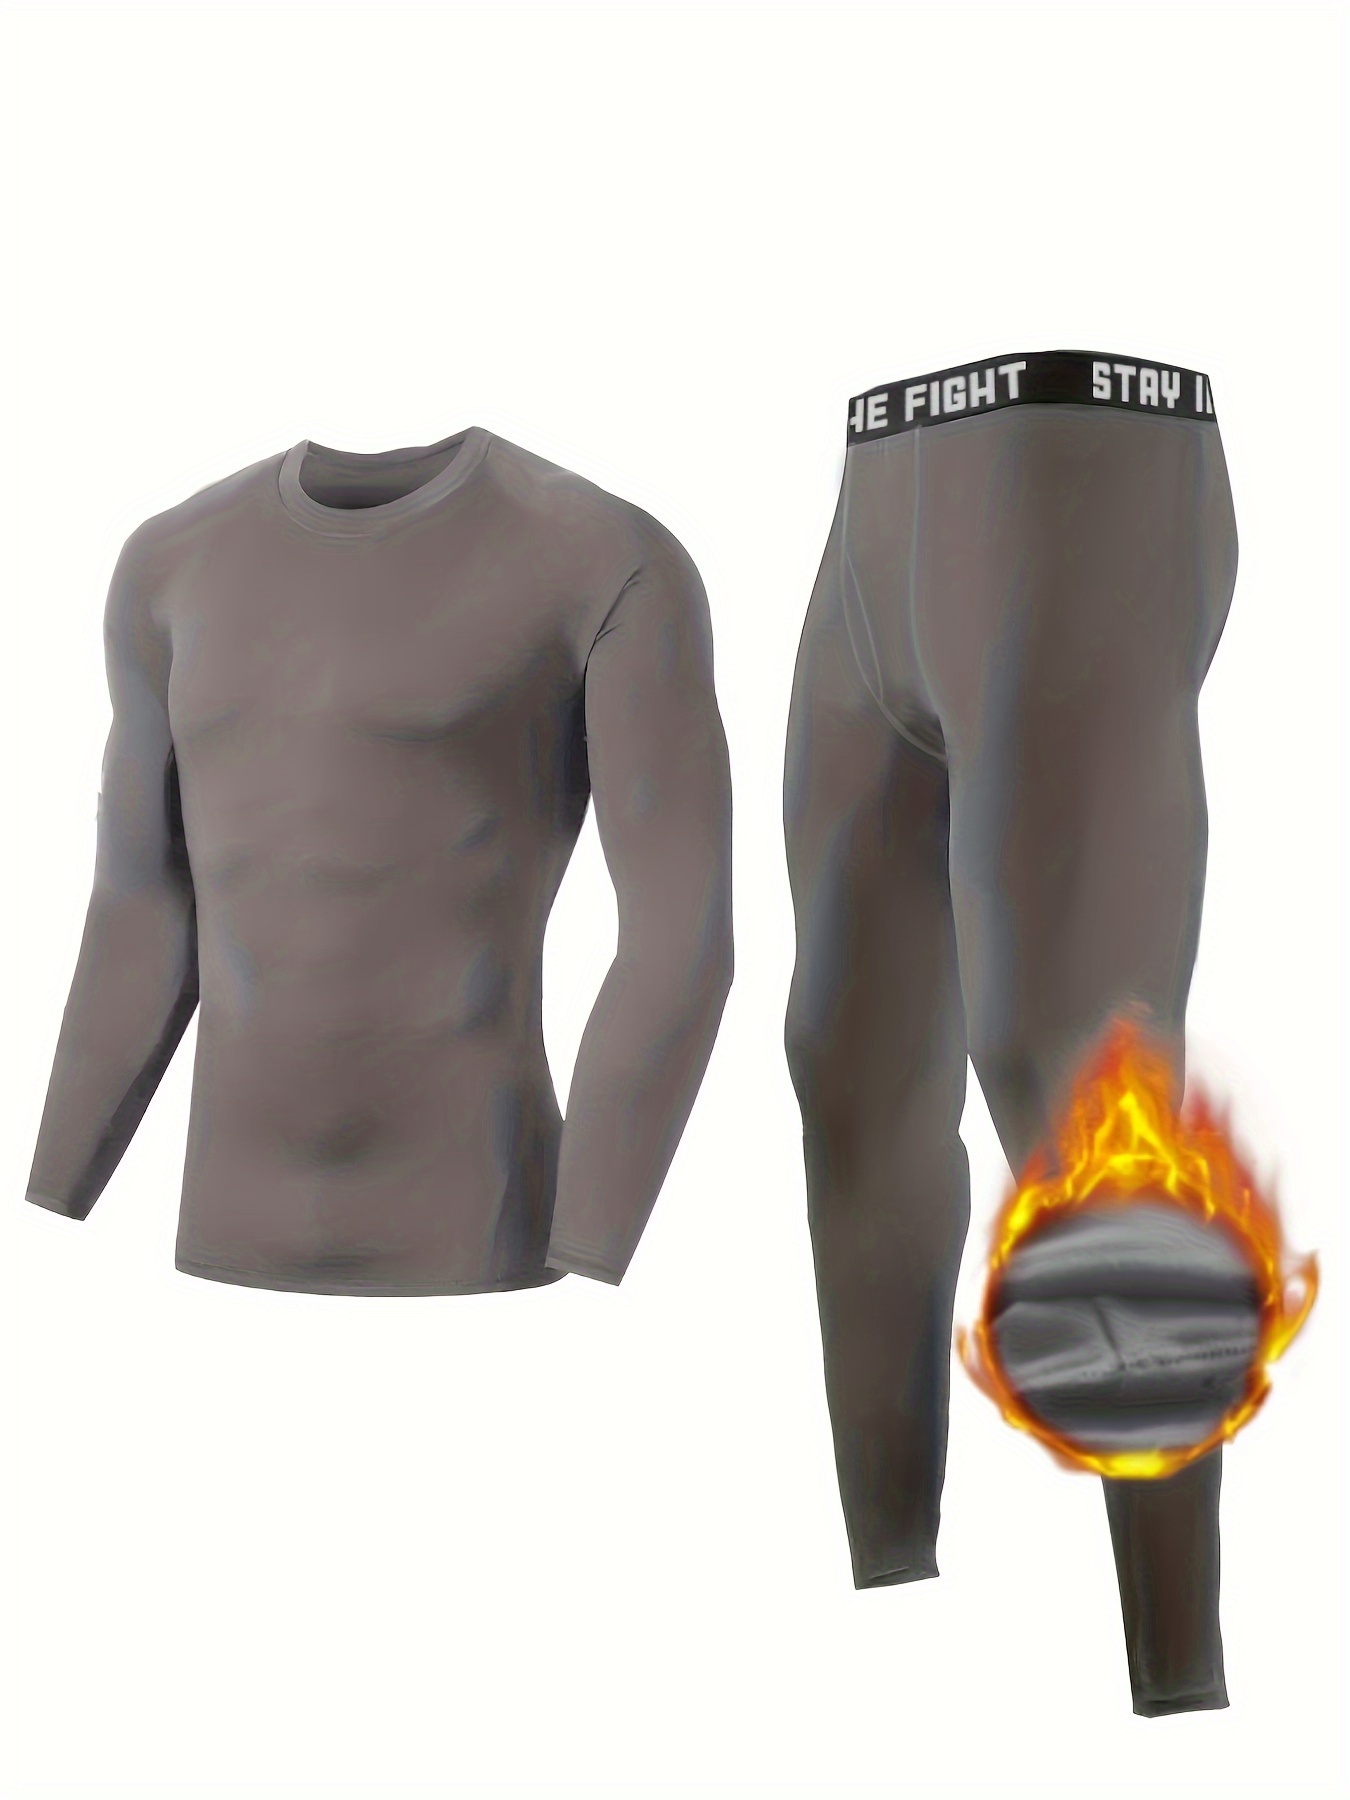 Thermal Underwear Set For Ski, Men's Base Layer Set For Cycling Hiking  Basketball, Long Sleeve Crew Neck Tops & Pants